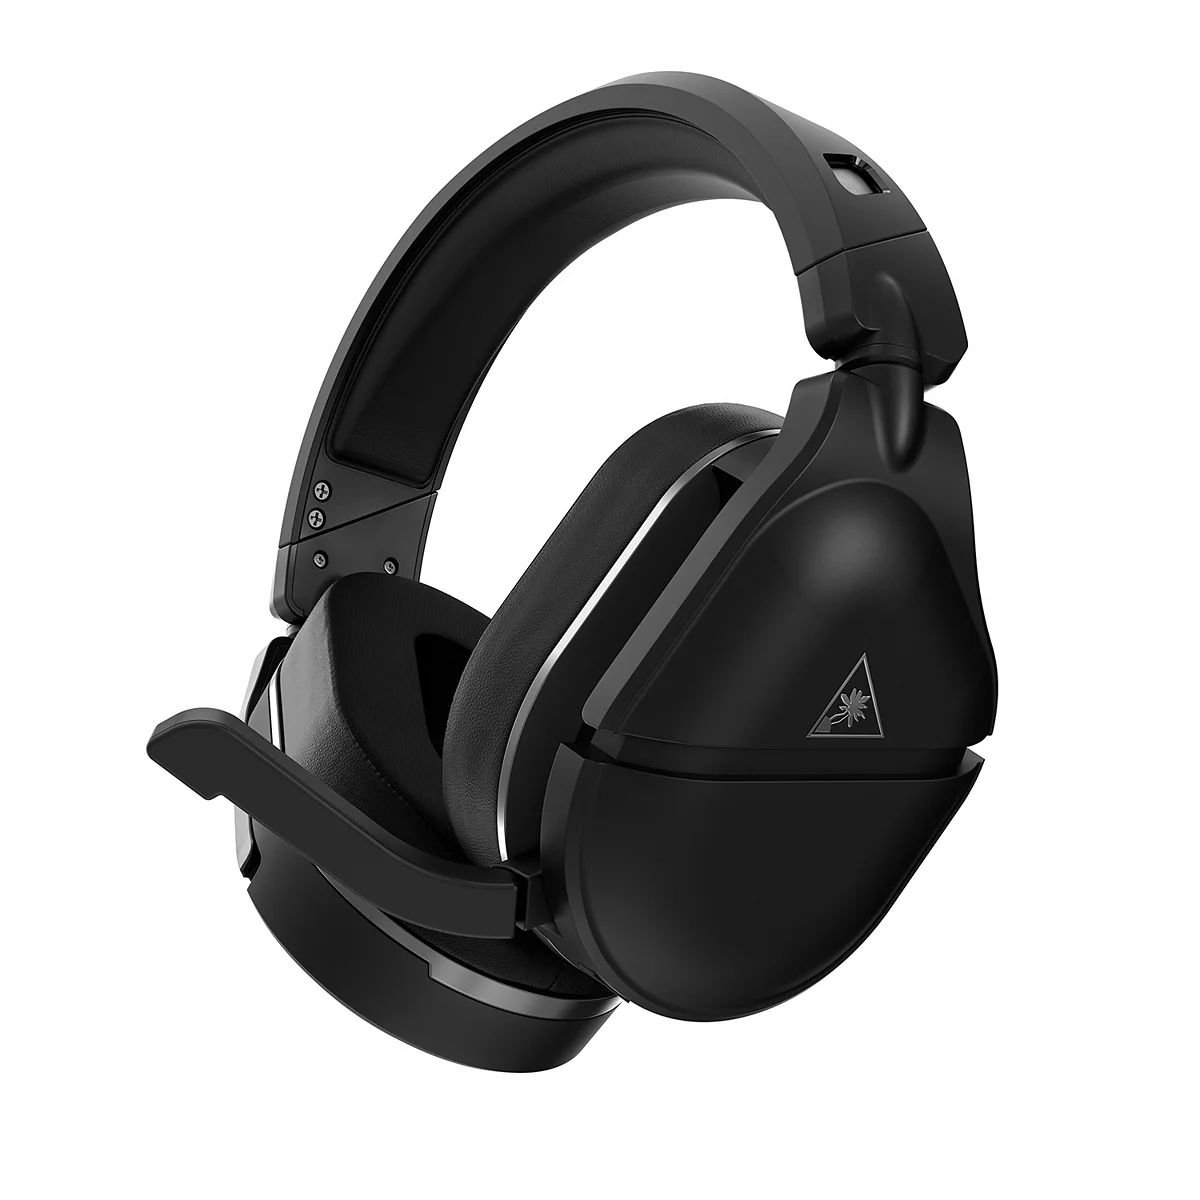 Turtle Beach Stealth 700 Gen 2 Premium Wireless Gaming Headset for PlayStation 5 & PlayStation 4 | Kohl's